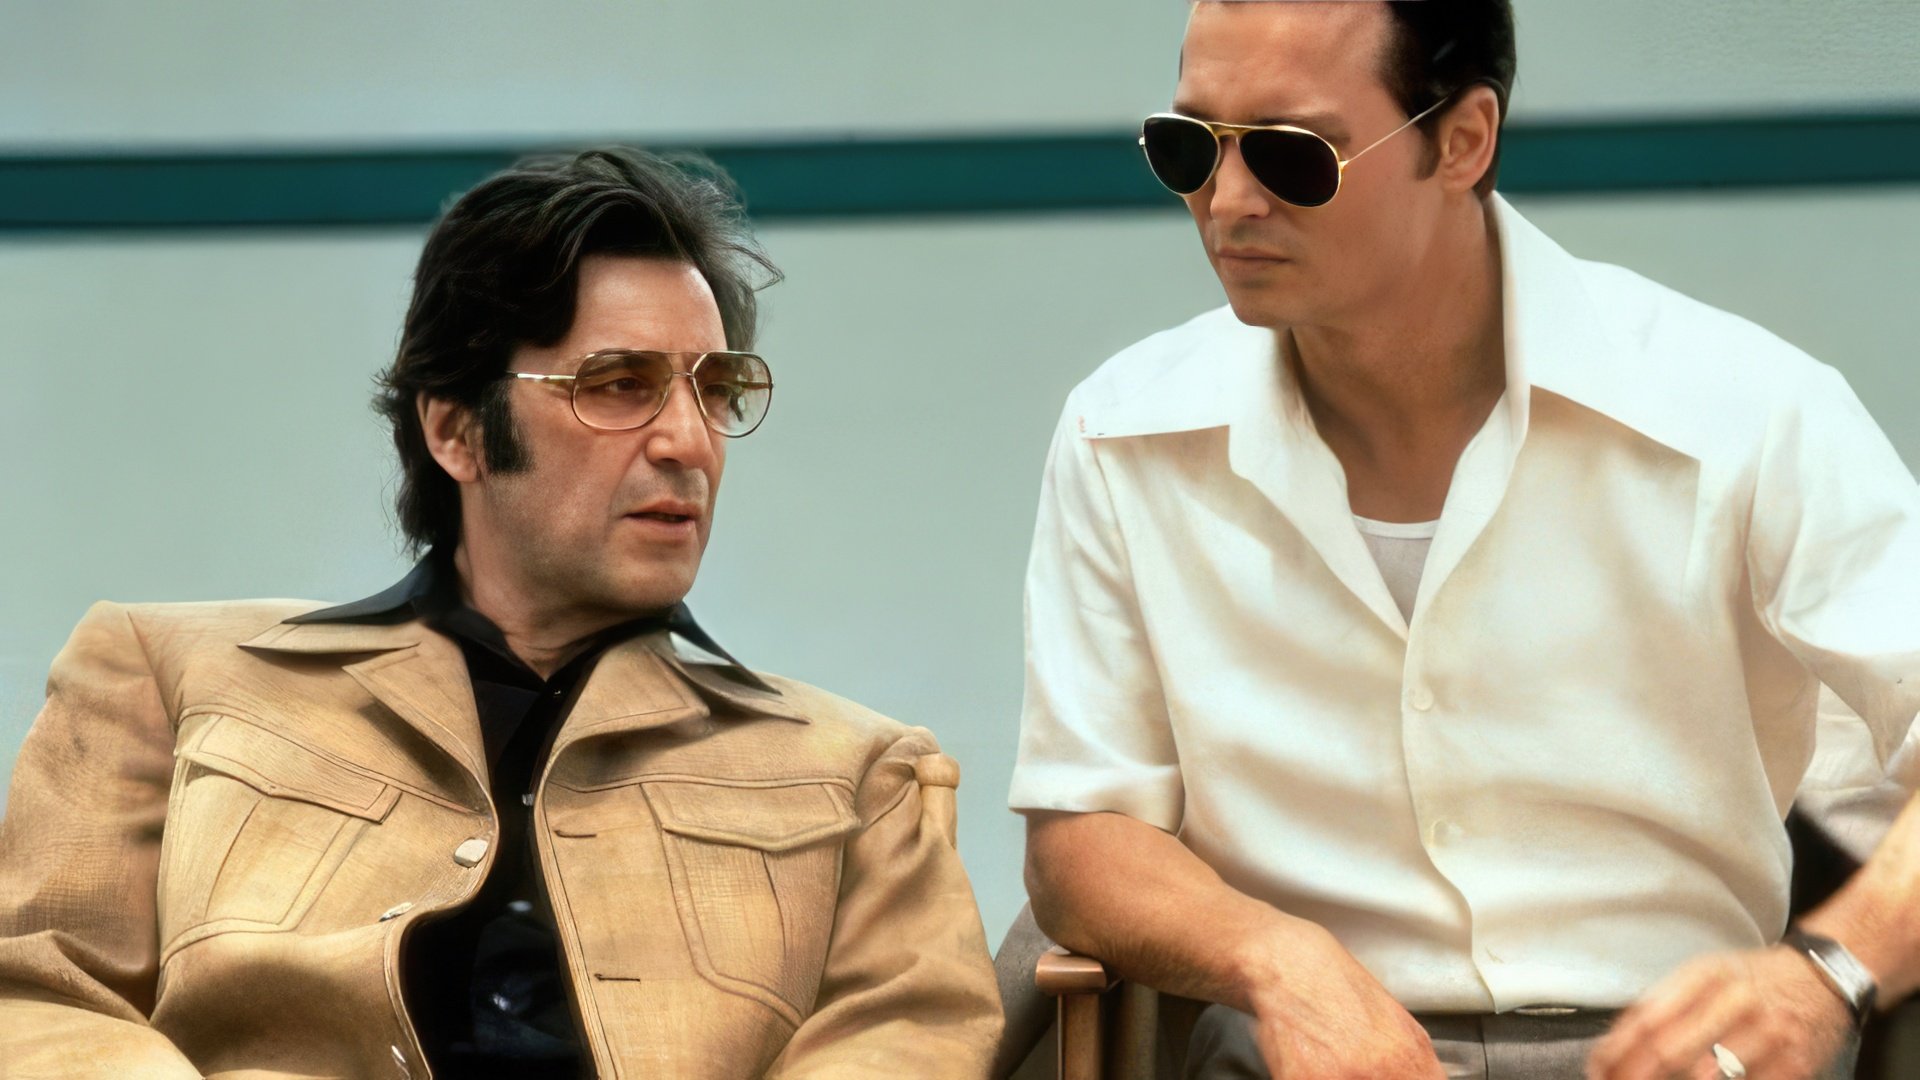 Al Pacino and Johnny Depp played alongside in “Donnie Brasco”